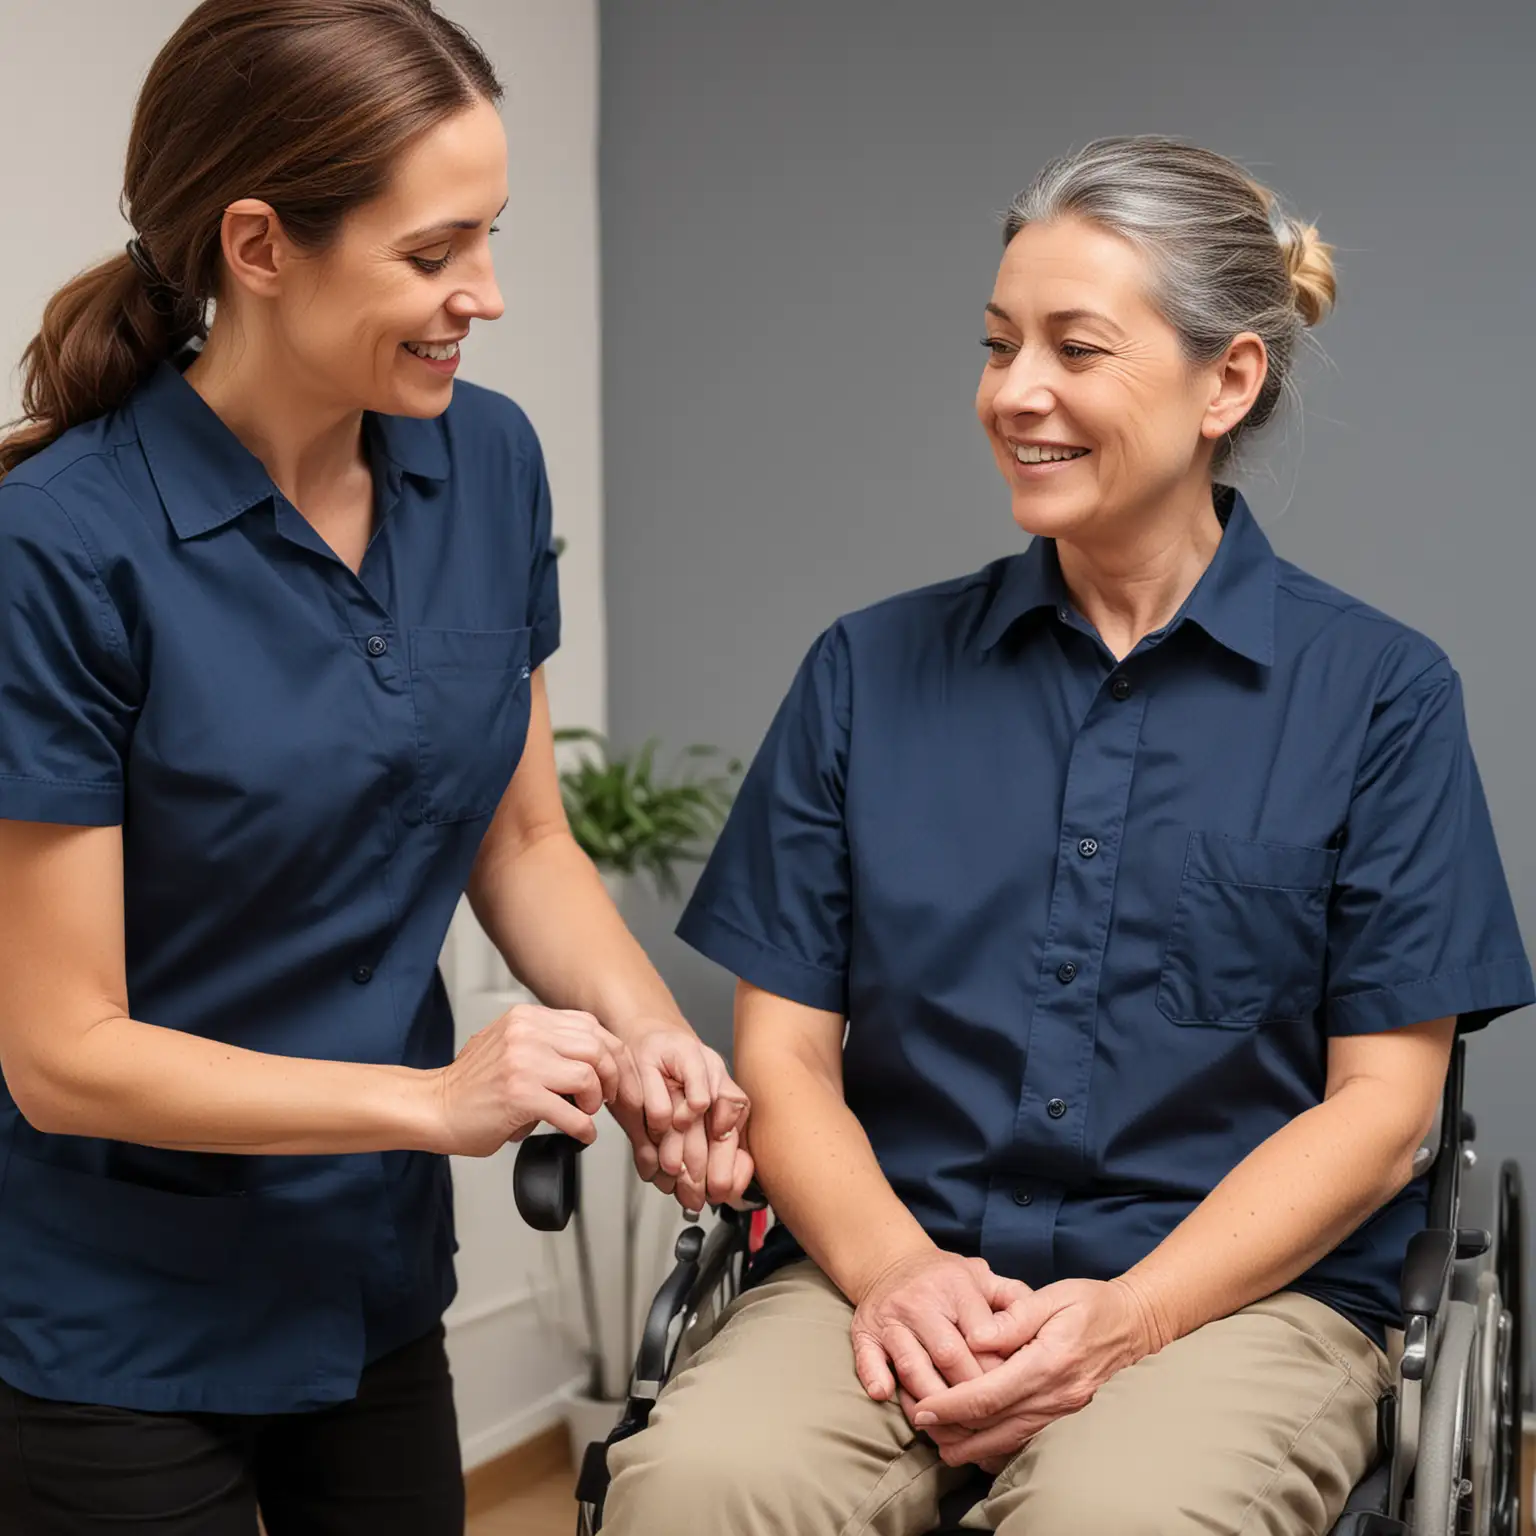 Occupational Therapist Assisting MiddleAged Person with Disability in Blue Shirt